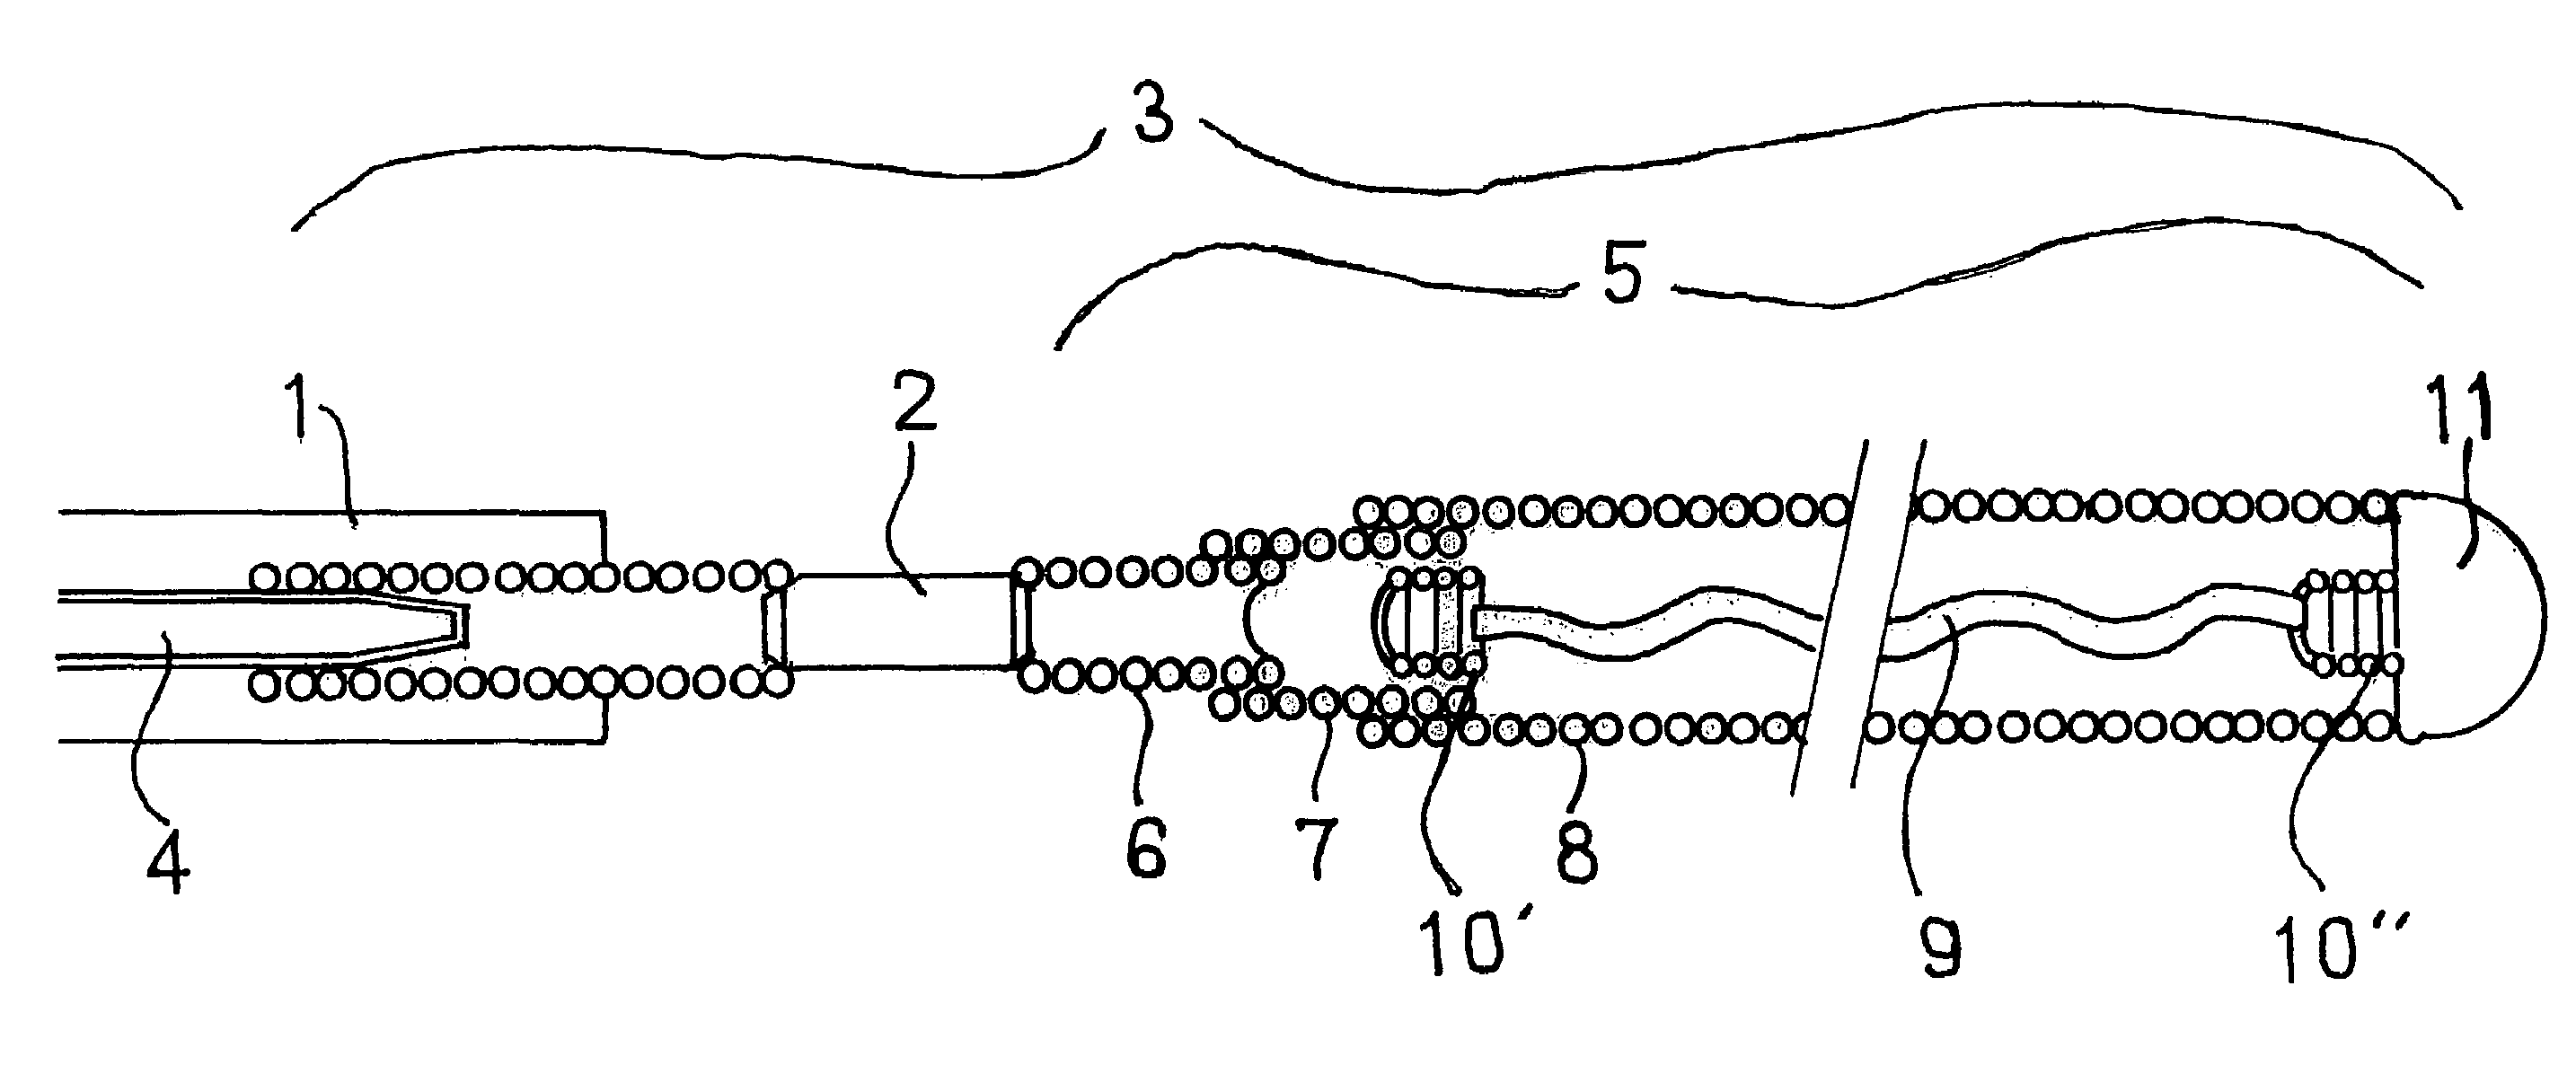 Device for implanting occlusion spirals